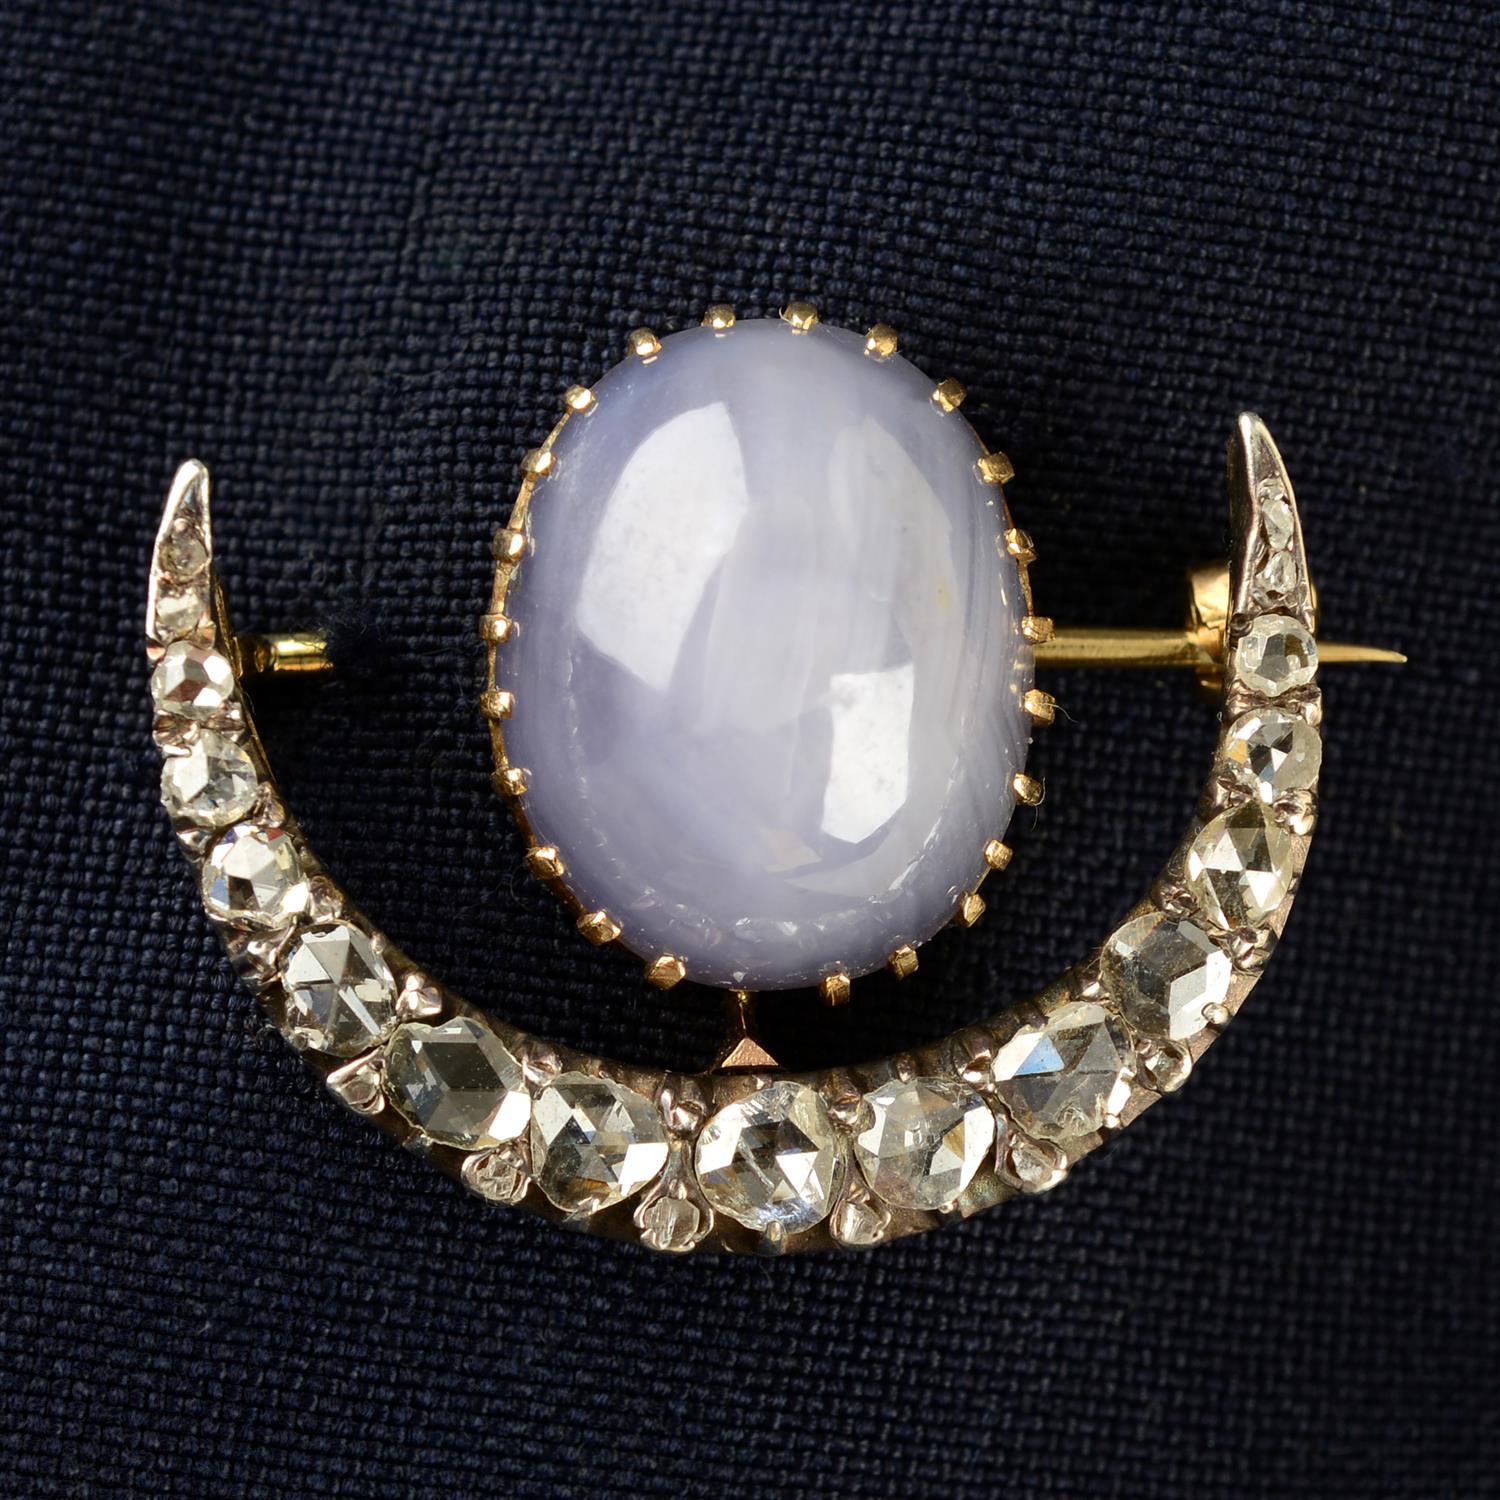 A late 19th century silver and gold rose-cut diamond crescent brooch, with star sapphire cabochon